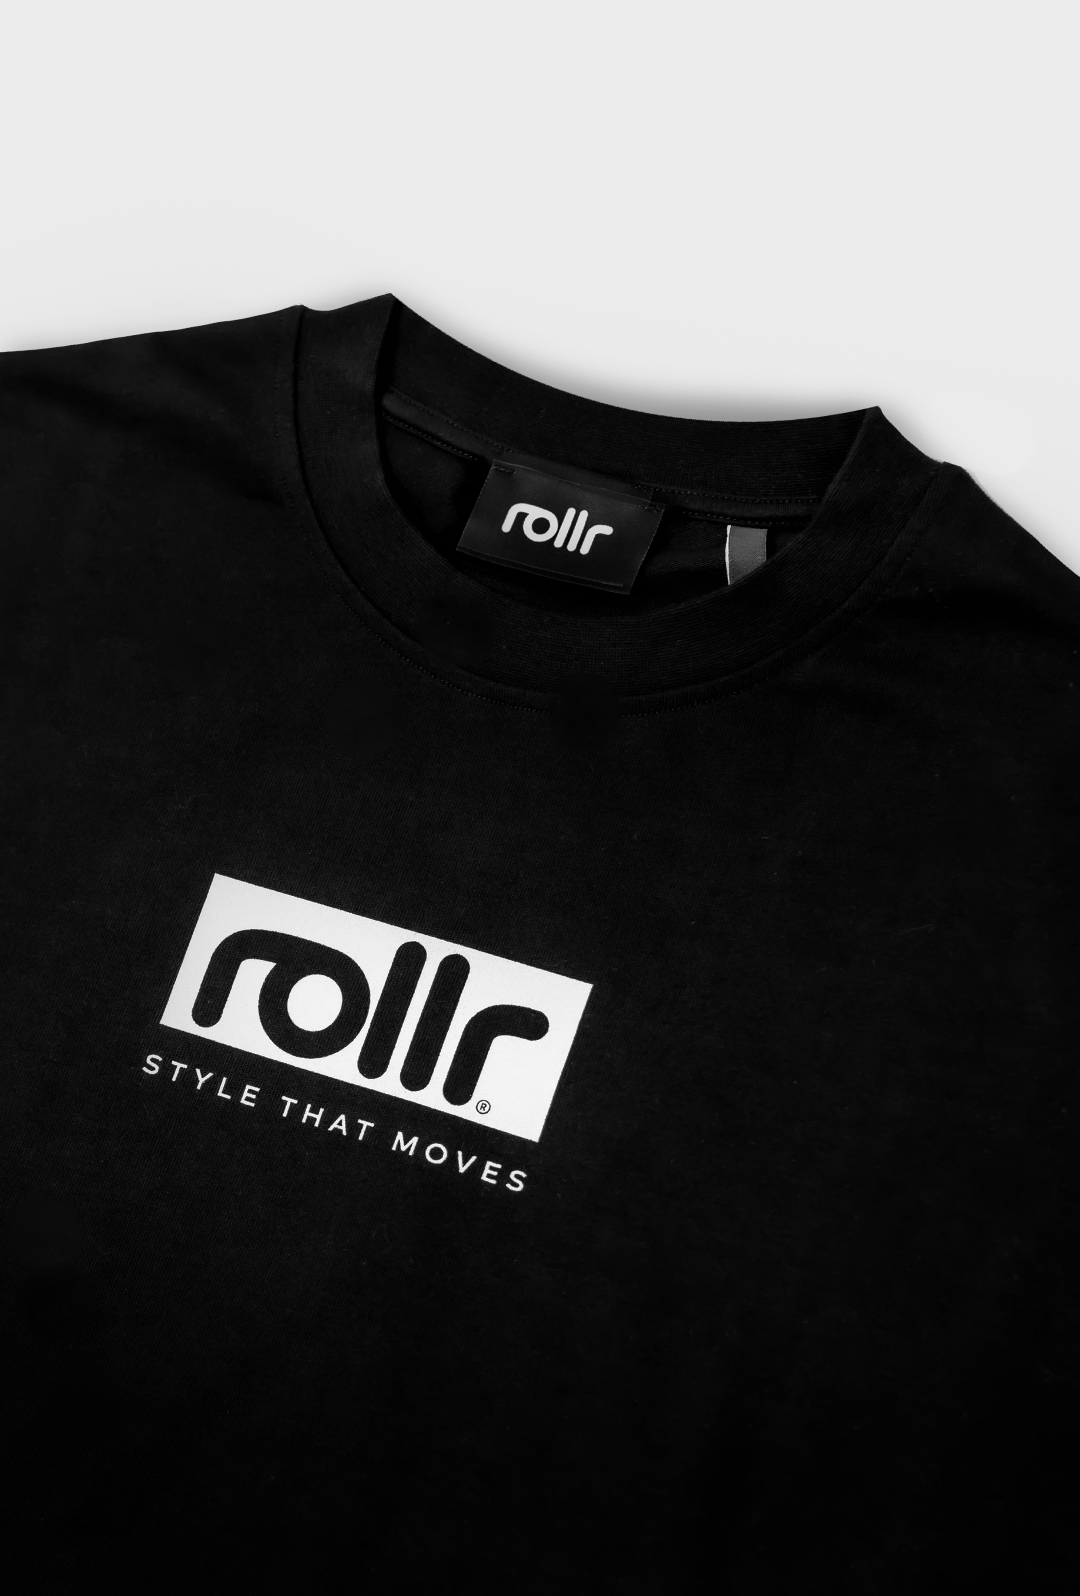 roller clothing oversized midnight black heavyweight tshirt in french terry organic cotton with rollr logo and style that moves tagline printed on front with black label